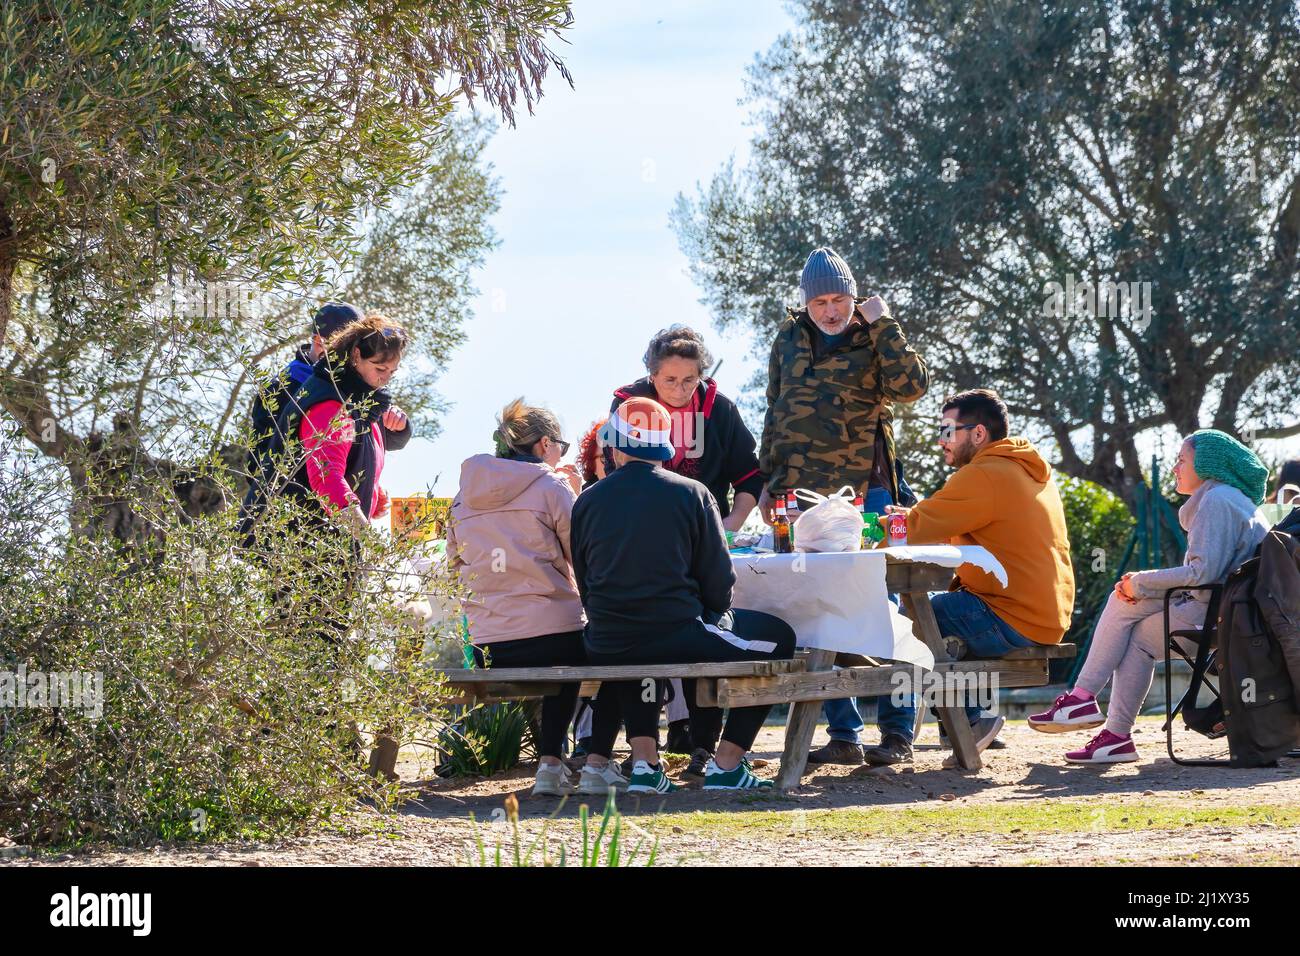 Seville, Spain - January 22, 2022: A family at lunch time in a picnic area Stock Photo